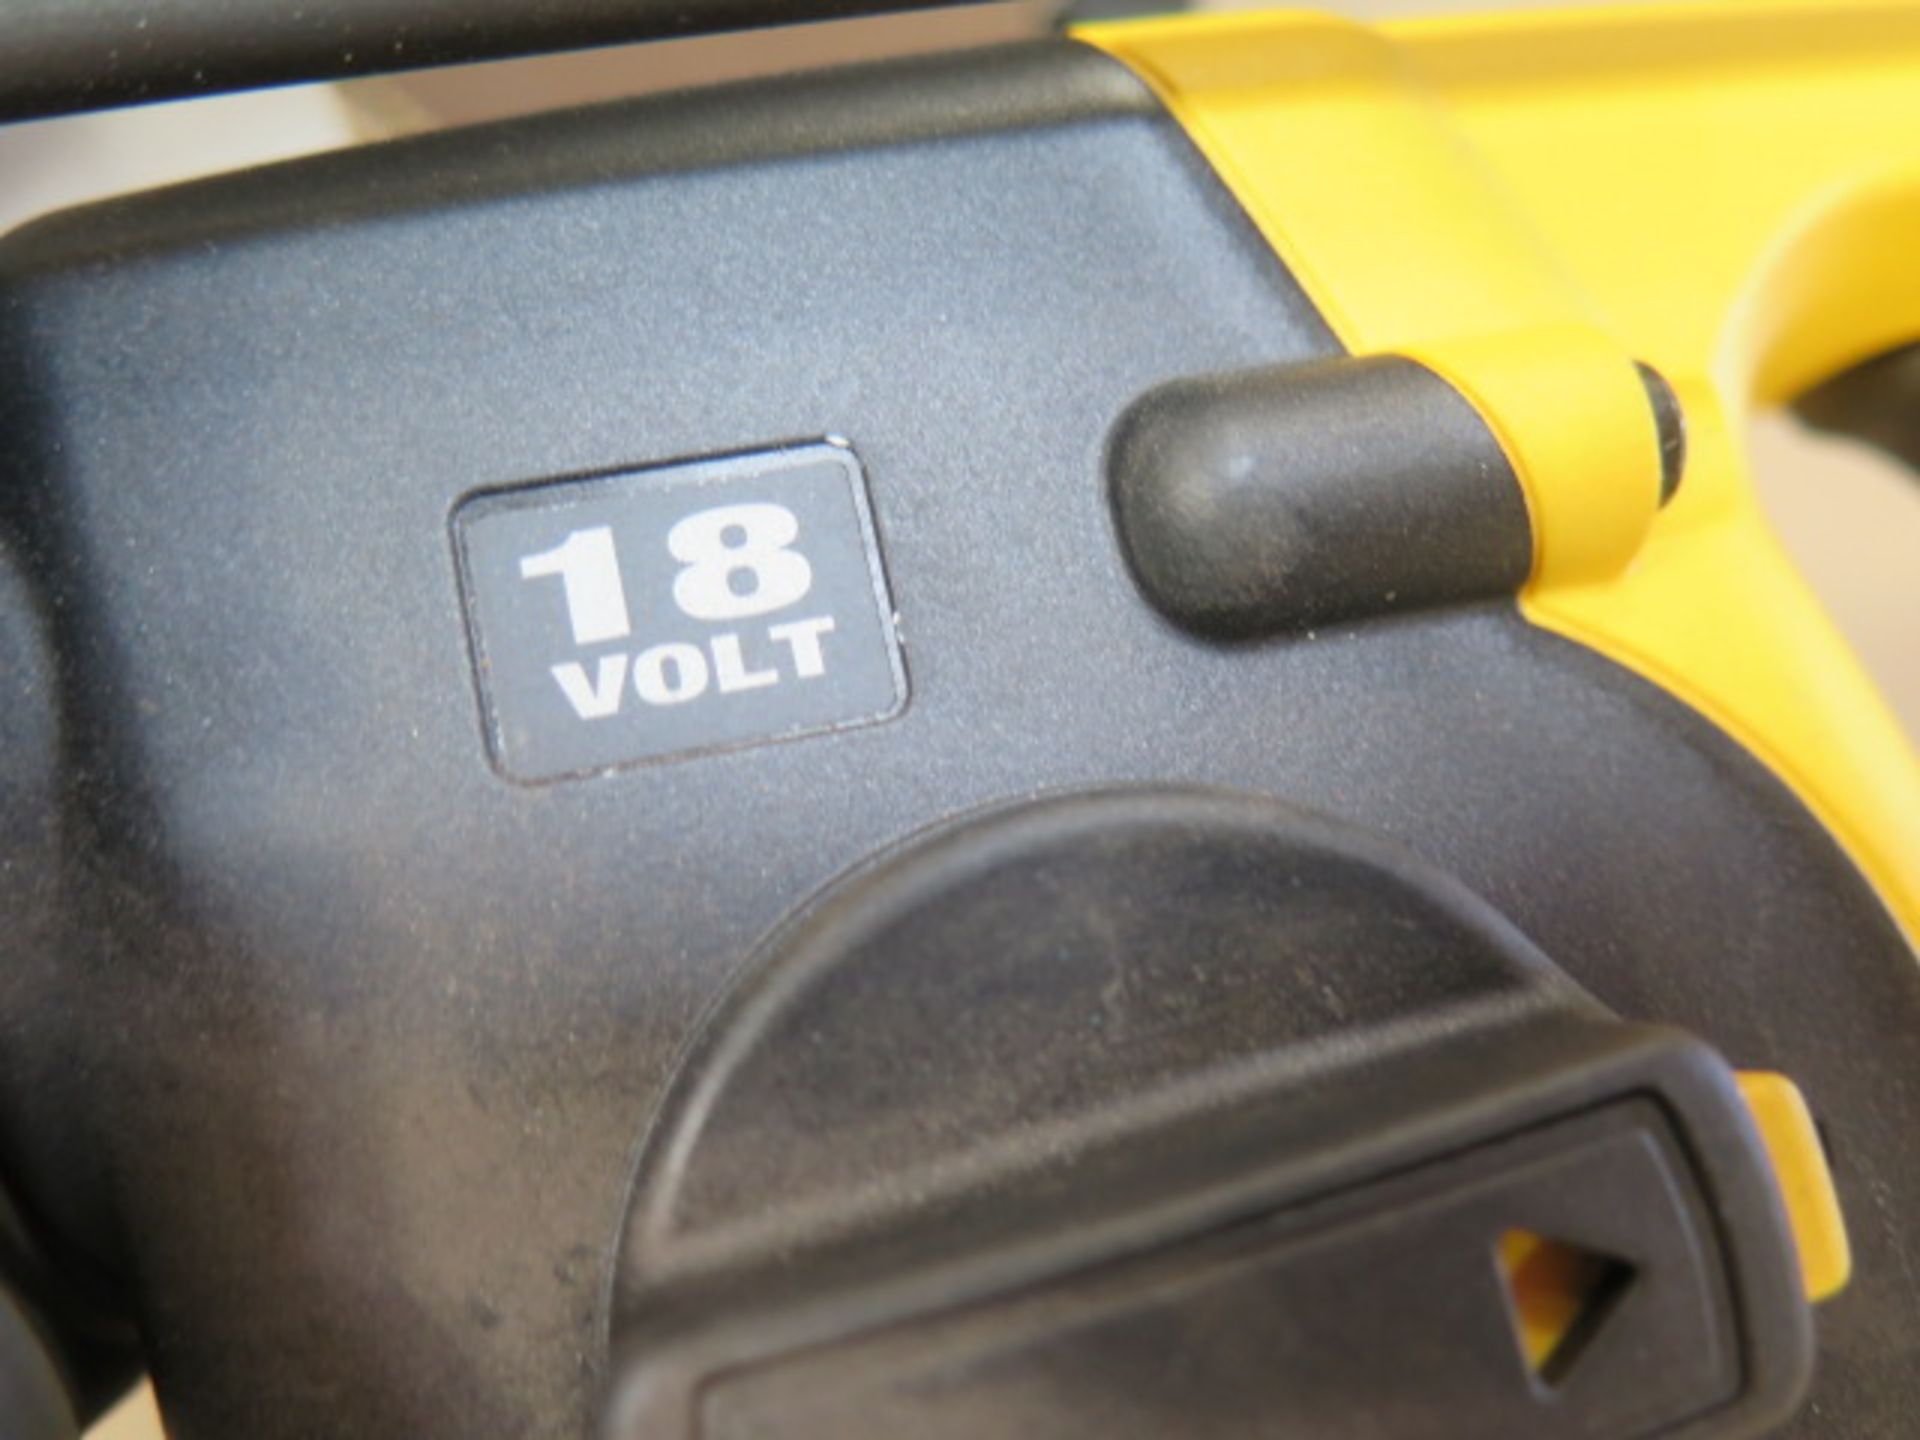 DeWalt 18 Volt Hammer Drill w/ Charger (SOLD AS-IS - NO WARRANTY) - Image 4 of 6